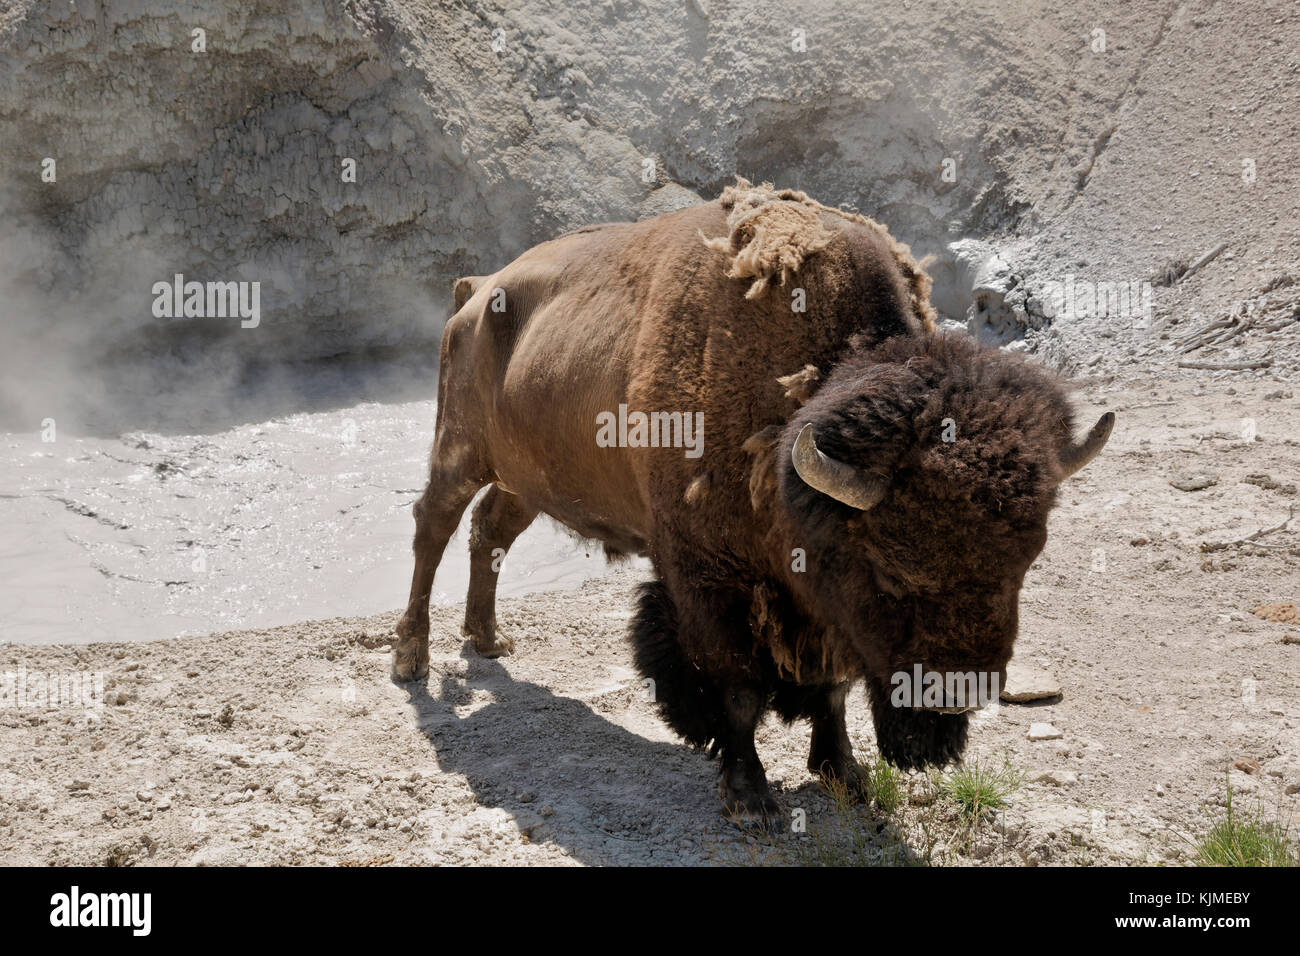 WY02649-00...WYOMING - Buffalo relaxing in the warm steam of a mud pot in the Mud Volcano area of Yellowstone National Park. Stock Photo